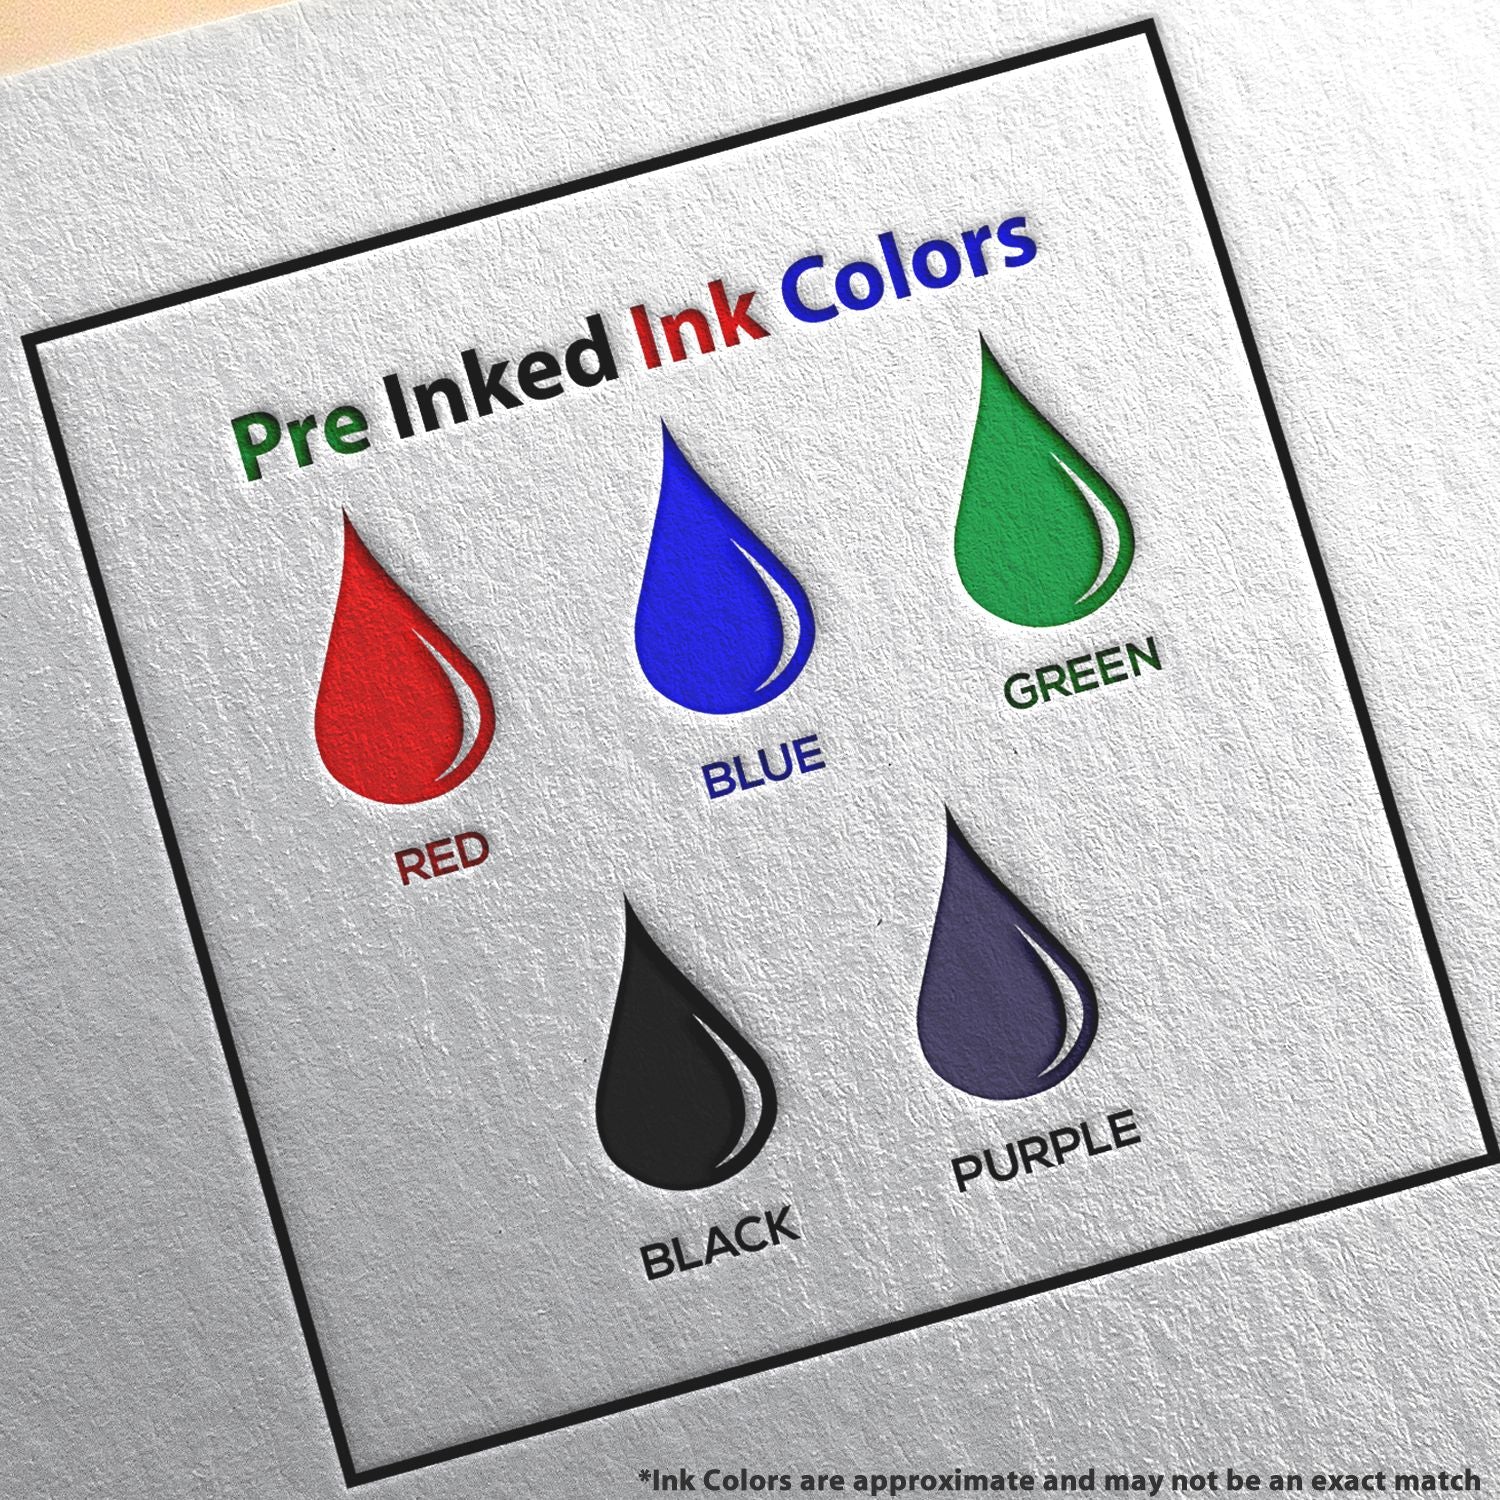 A picture showing the different ink colors or hues available for the Premium MaxLight Pre-Inked Connecticut Landscape Architectural Stamp product.